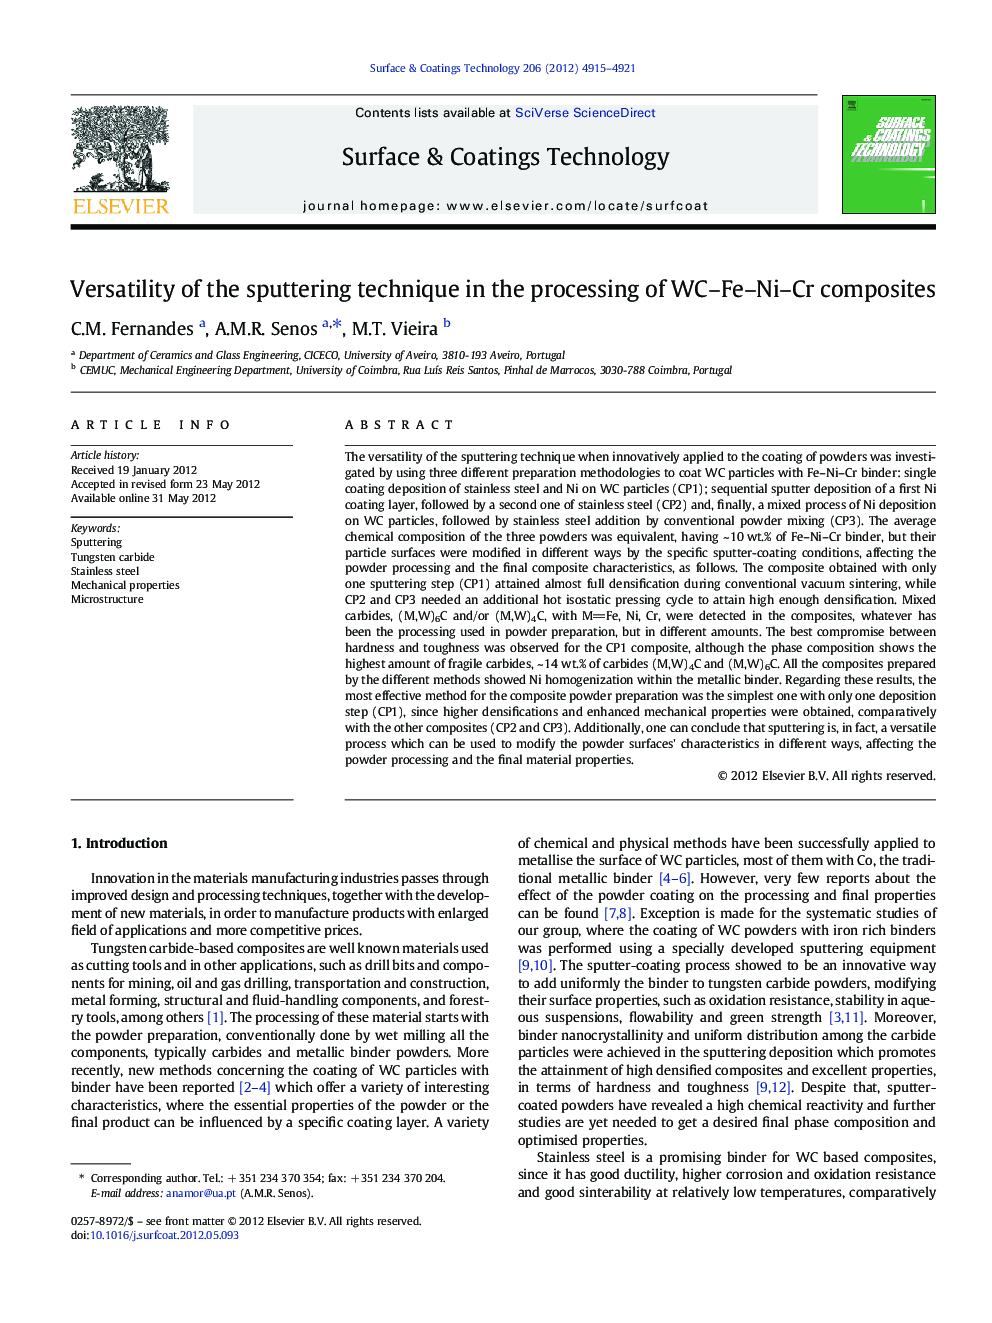 Versatility of the sputtering technique in the processing of WC-Fe-Ni-Cr composites